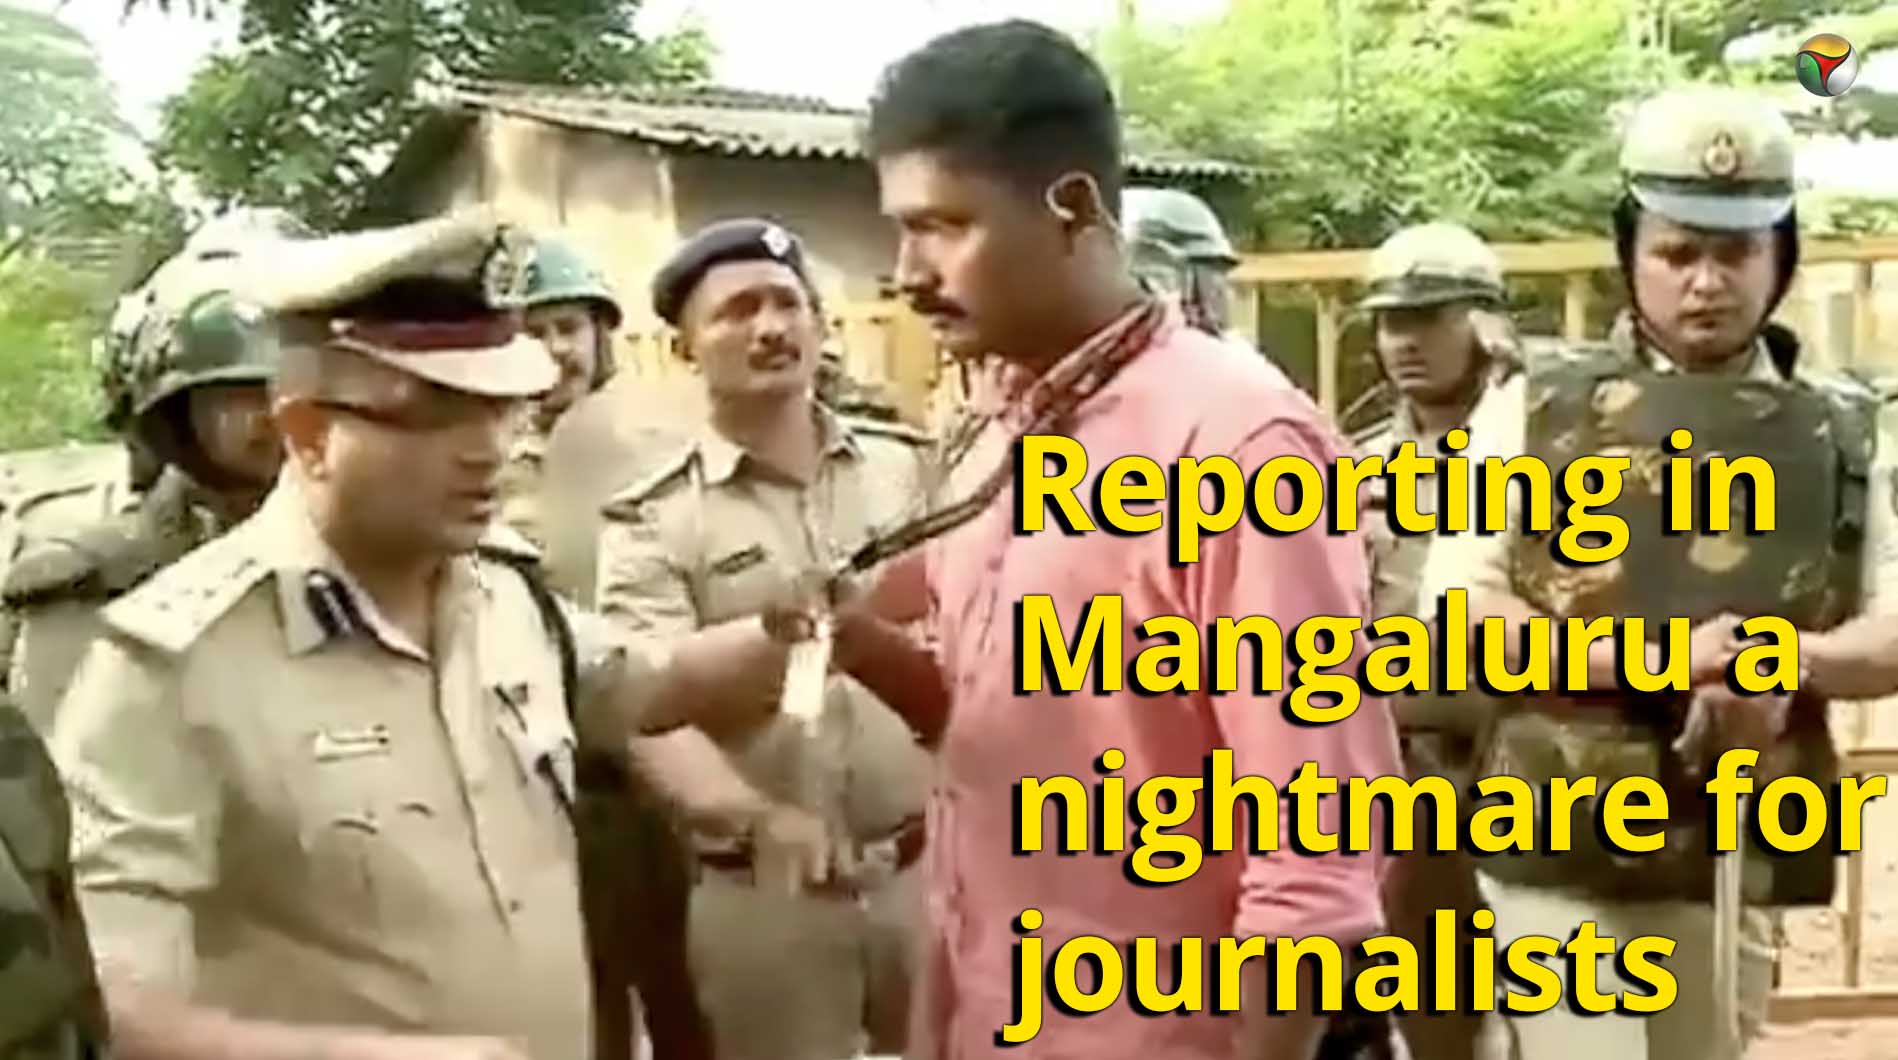 Reporting in Mangaluru a nightmare for journalists